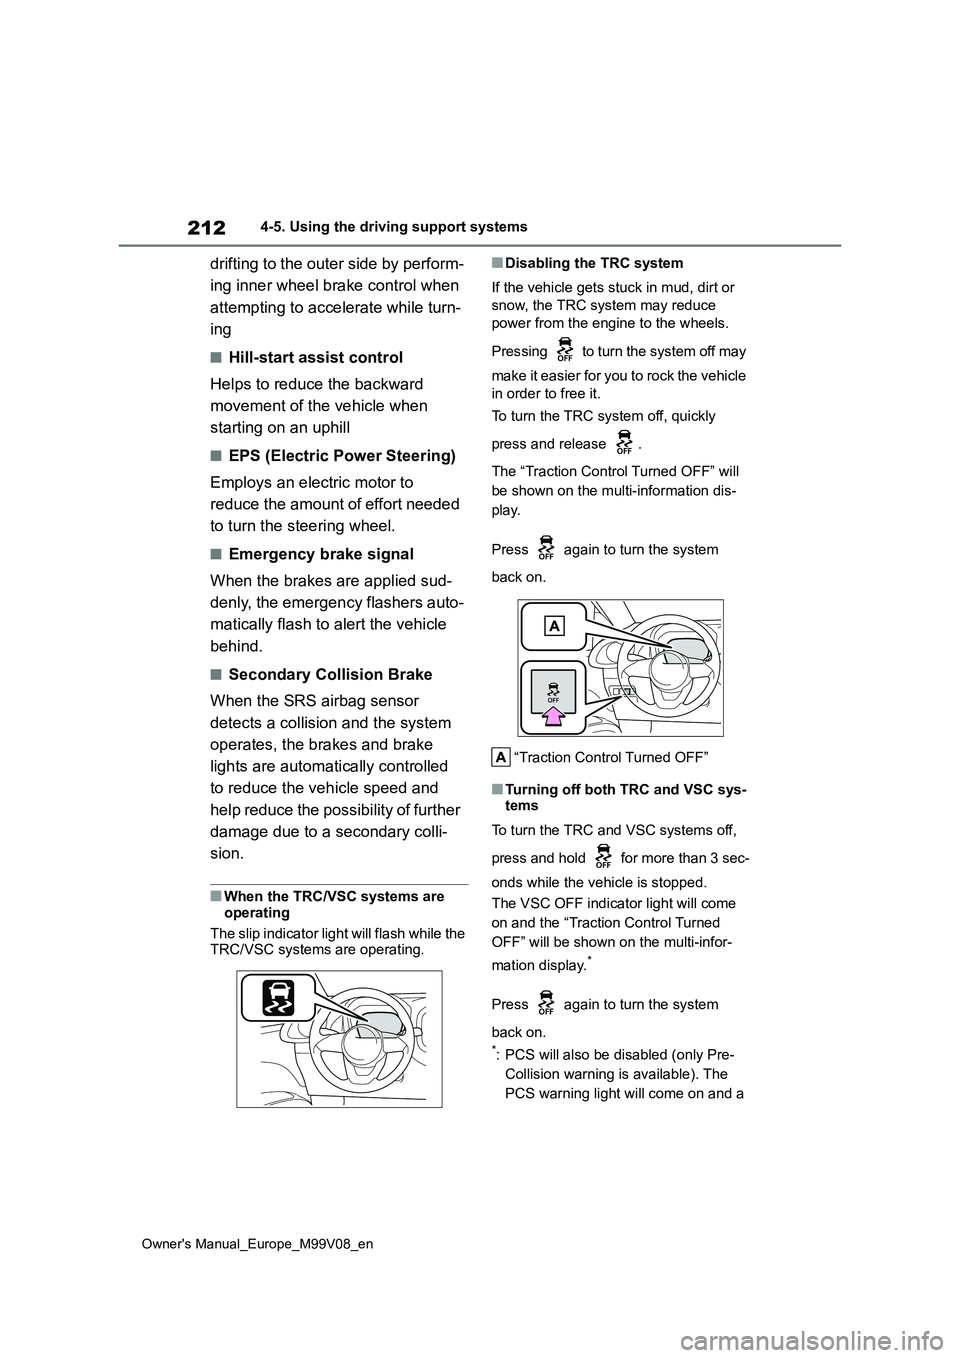 TOYOTA AYGO X 2022  Owners Manual (in English) 212
Owner's Manual_Europe_M99V08_en
4-5. Using the driving support systems
drifting to the outer side by perform- 
ing inner wheel brake control when  
attempting to accelerate while turn- 
ing
�